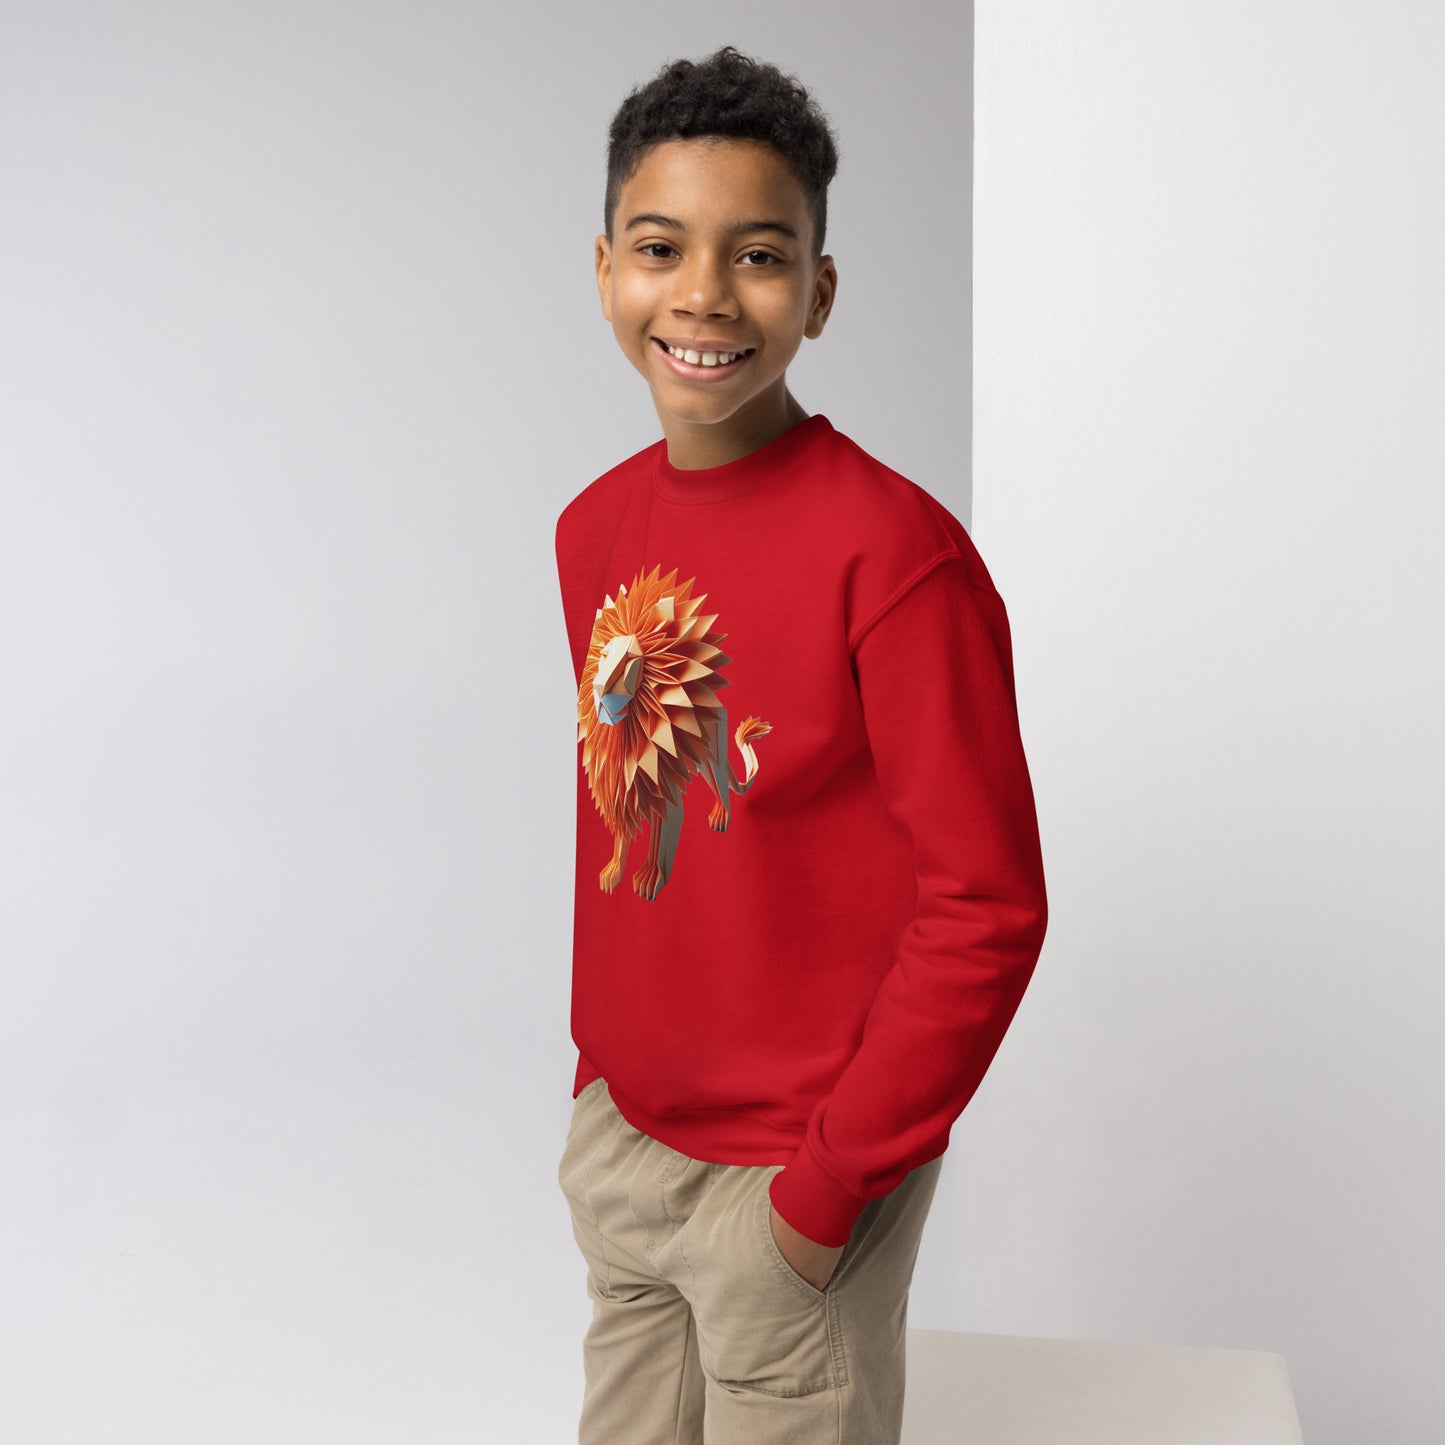 Youth with red Sweater with print of a lion